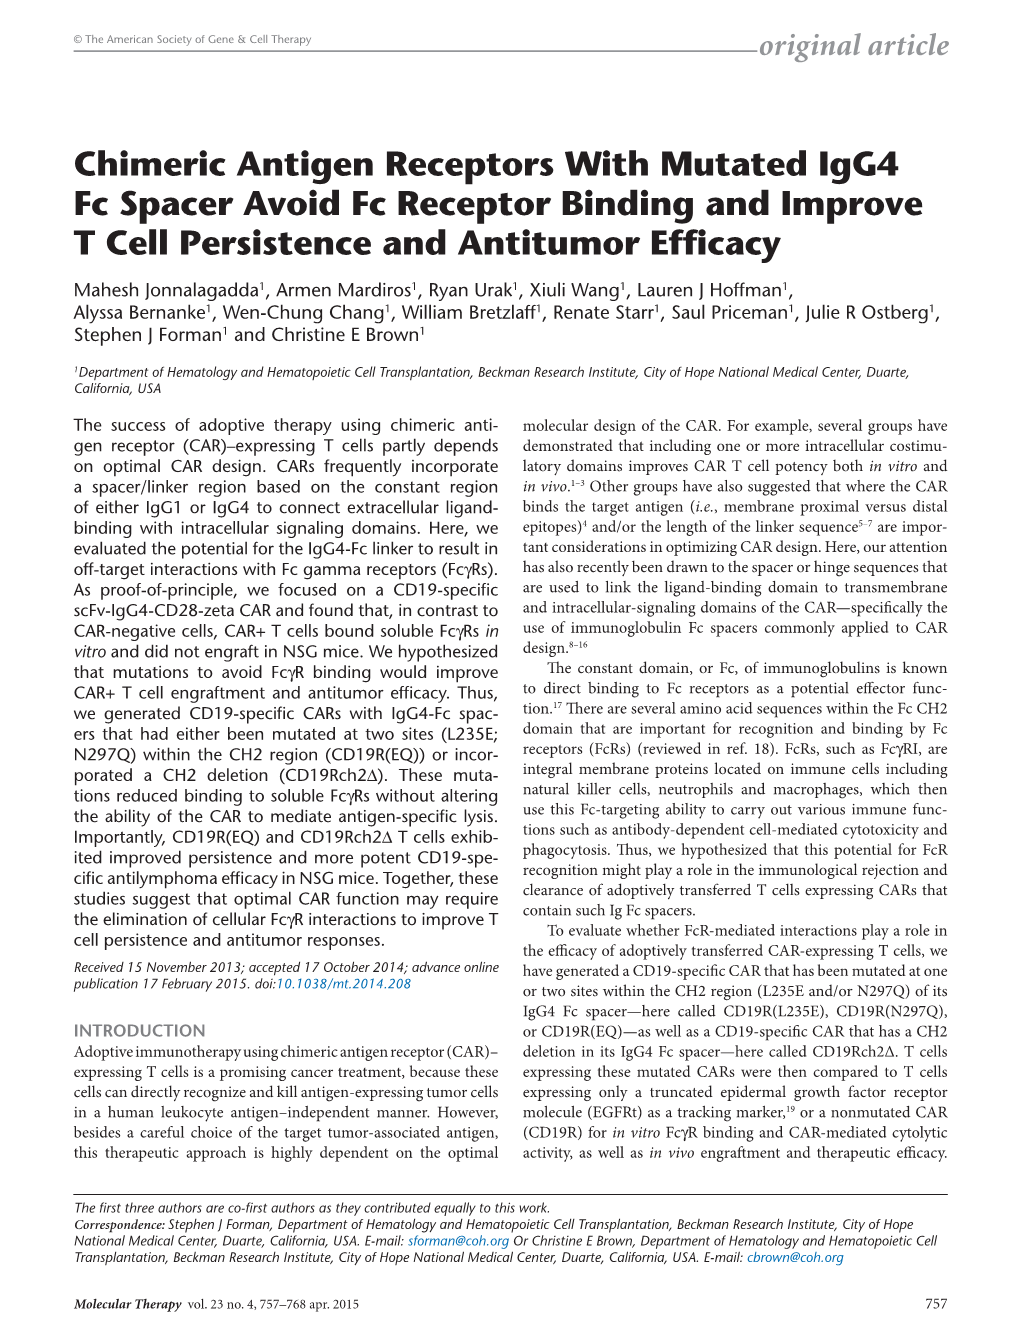 Chimeric Antigen Receptors with Mutated Igg4 Fc Spacer Avoid Fc Receptor Binding and Improve T Cell Persistence and Antitumor Efficacy